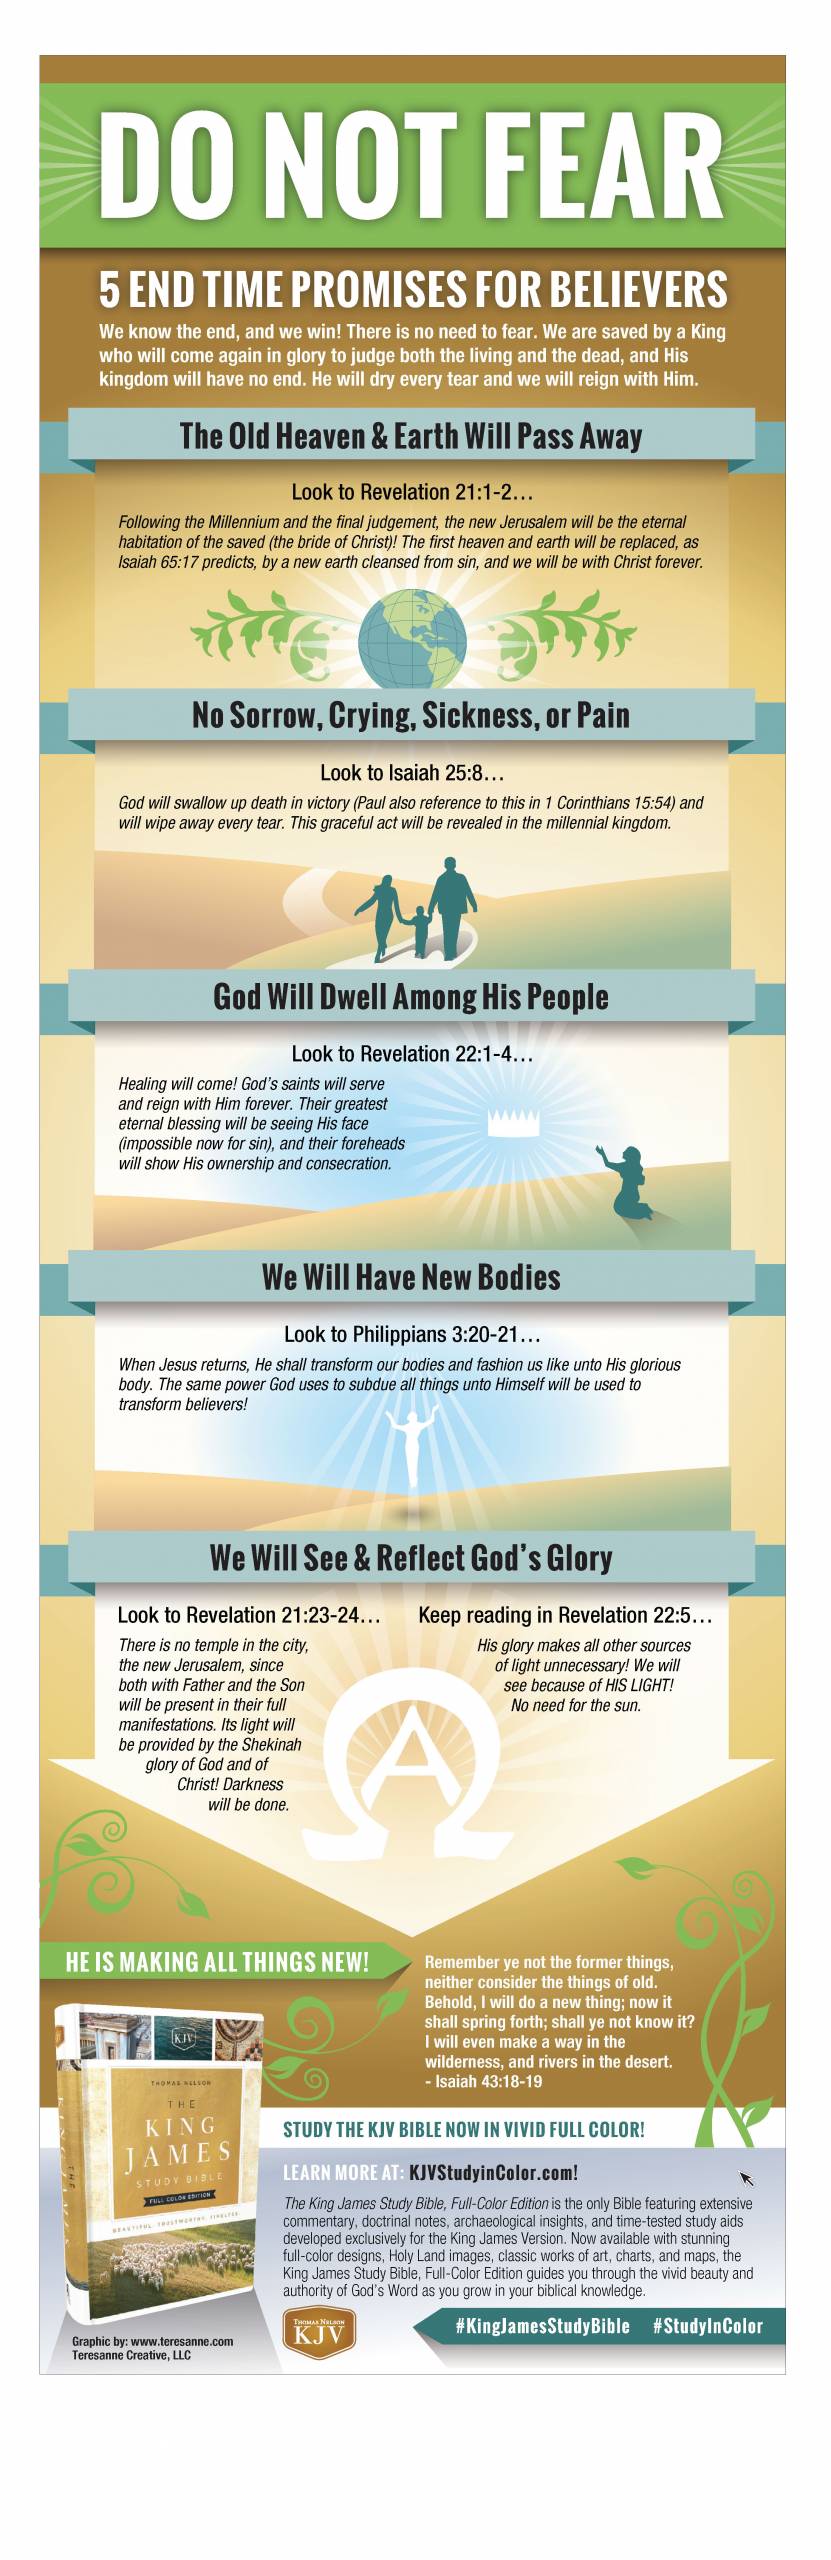 5 end time promises for believers